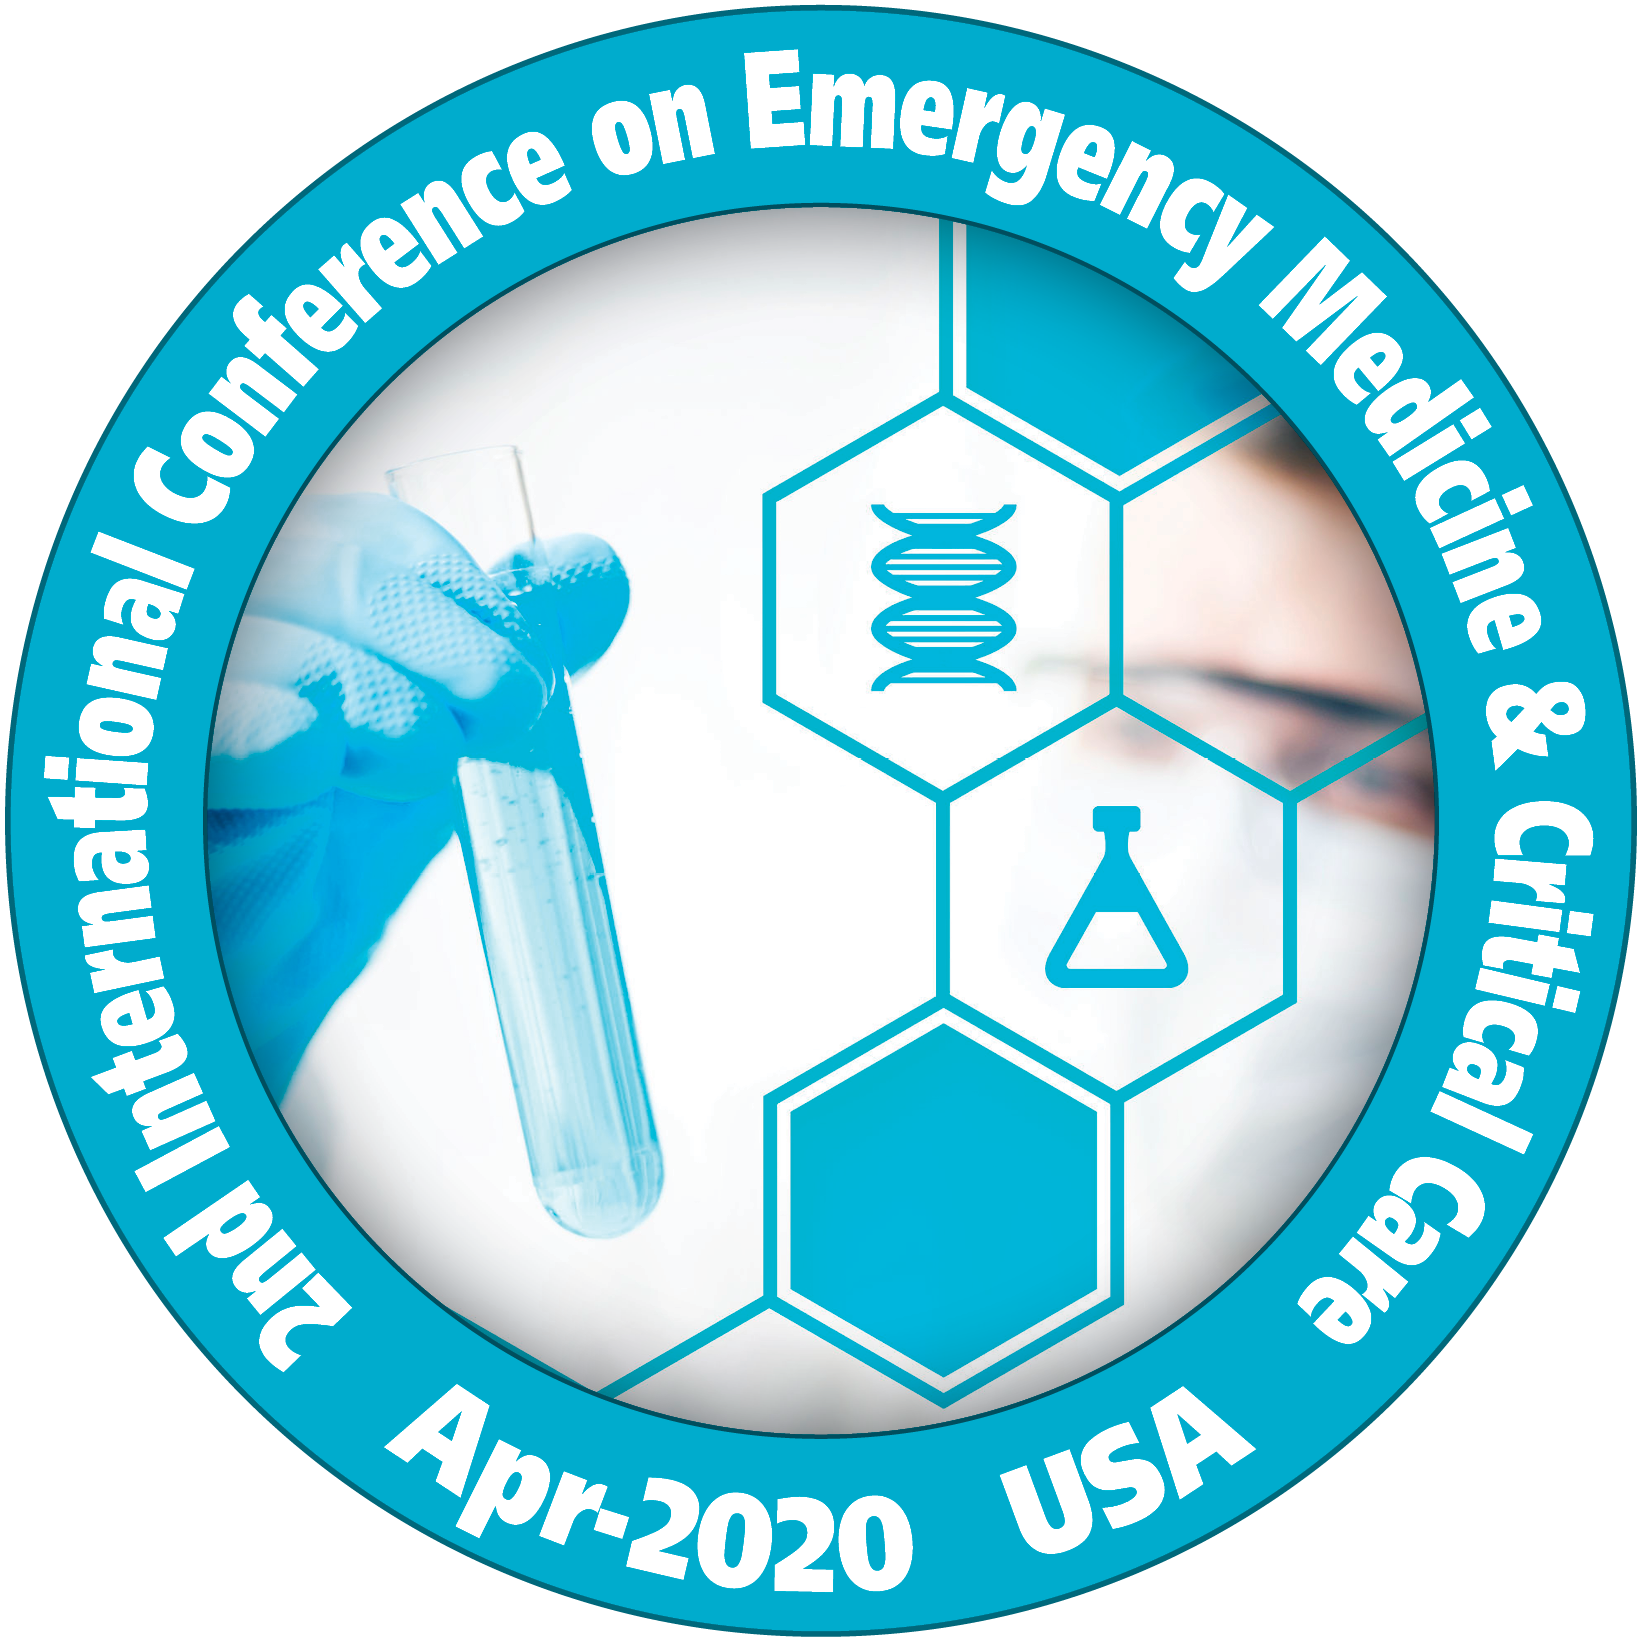 2nd International Conference on Emergency Medicine and Critical Care